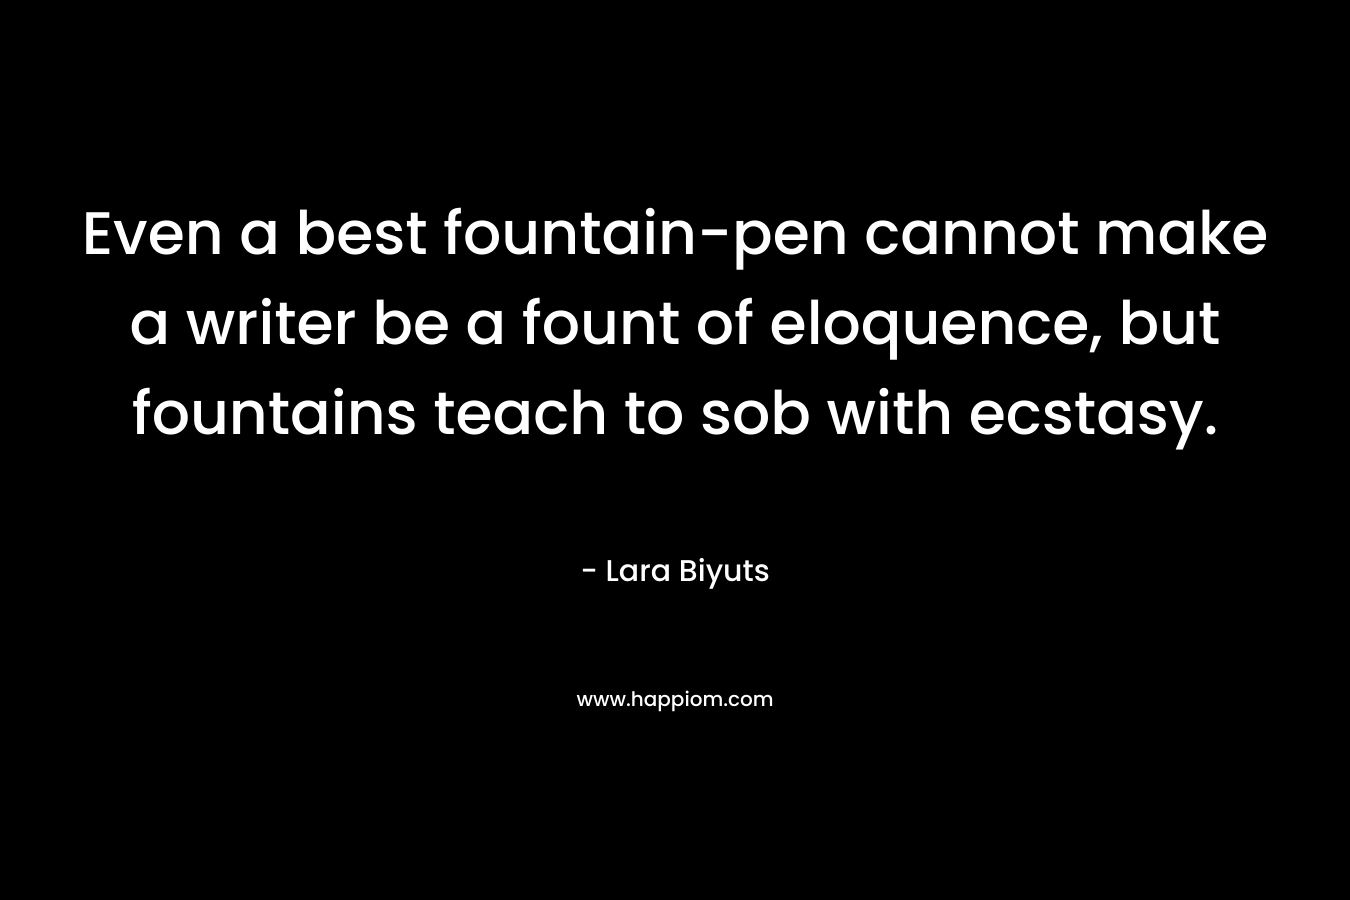 Even a best fountain-pen cannot make a writer be a fount of eloquence, but fountains teach to sob with ecstasy. – Lara Biyuts